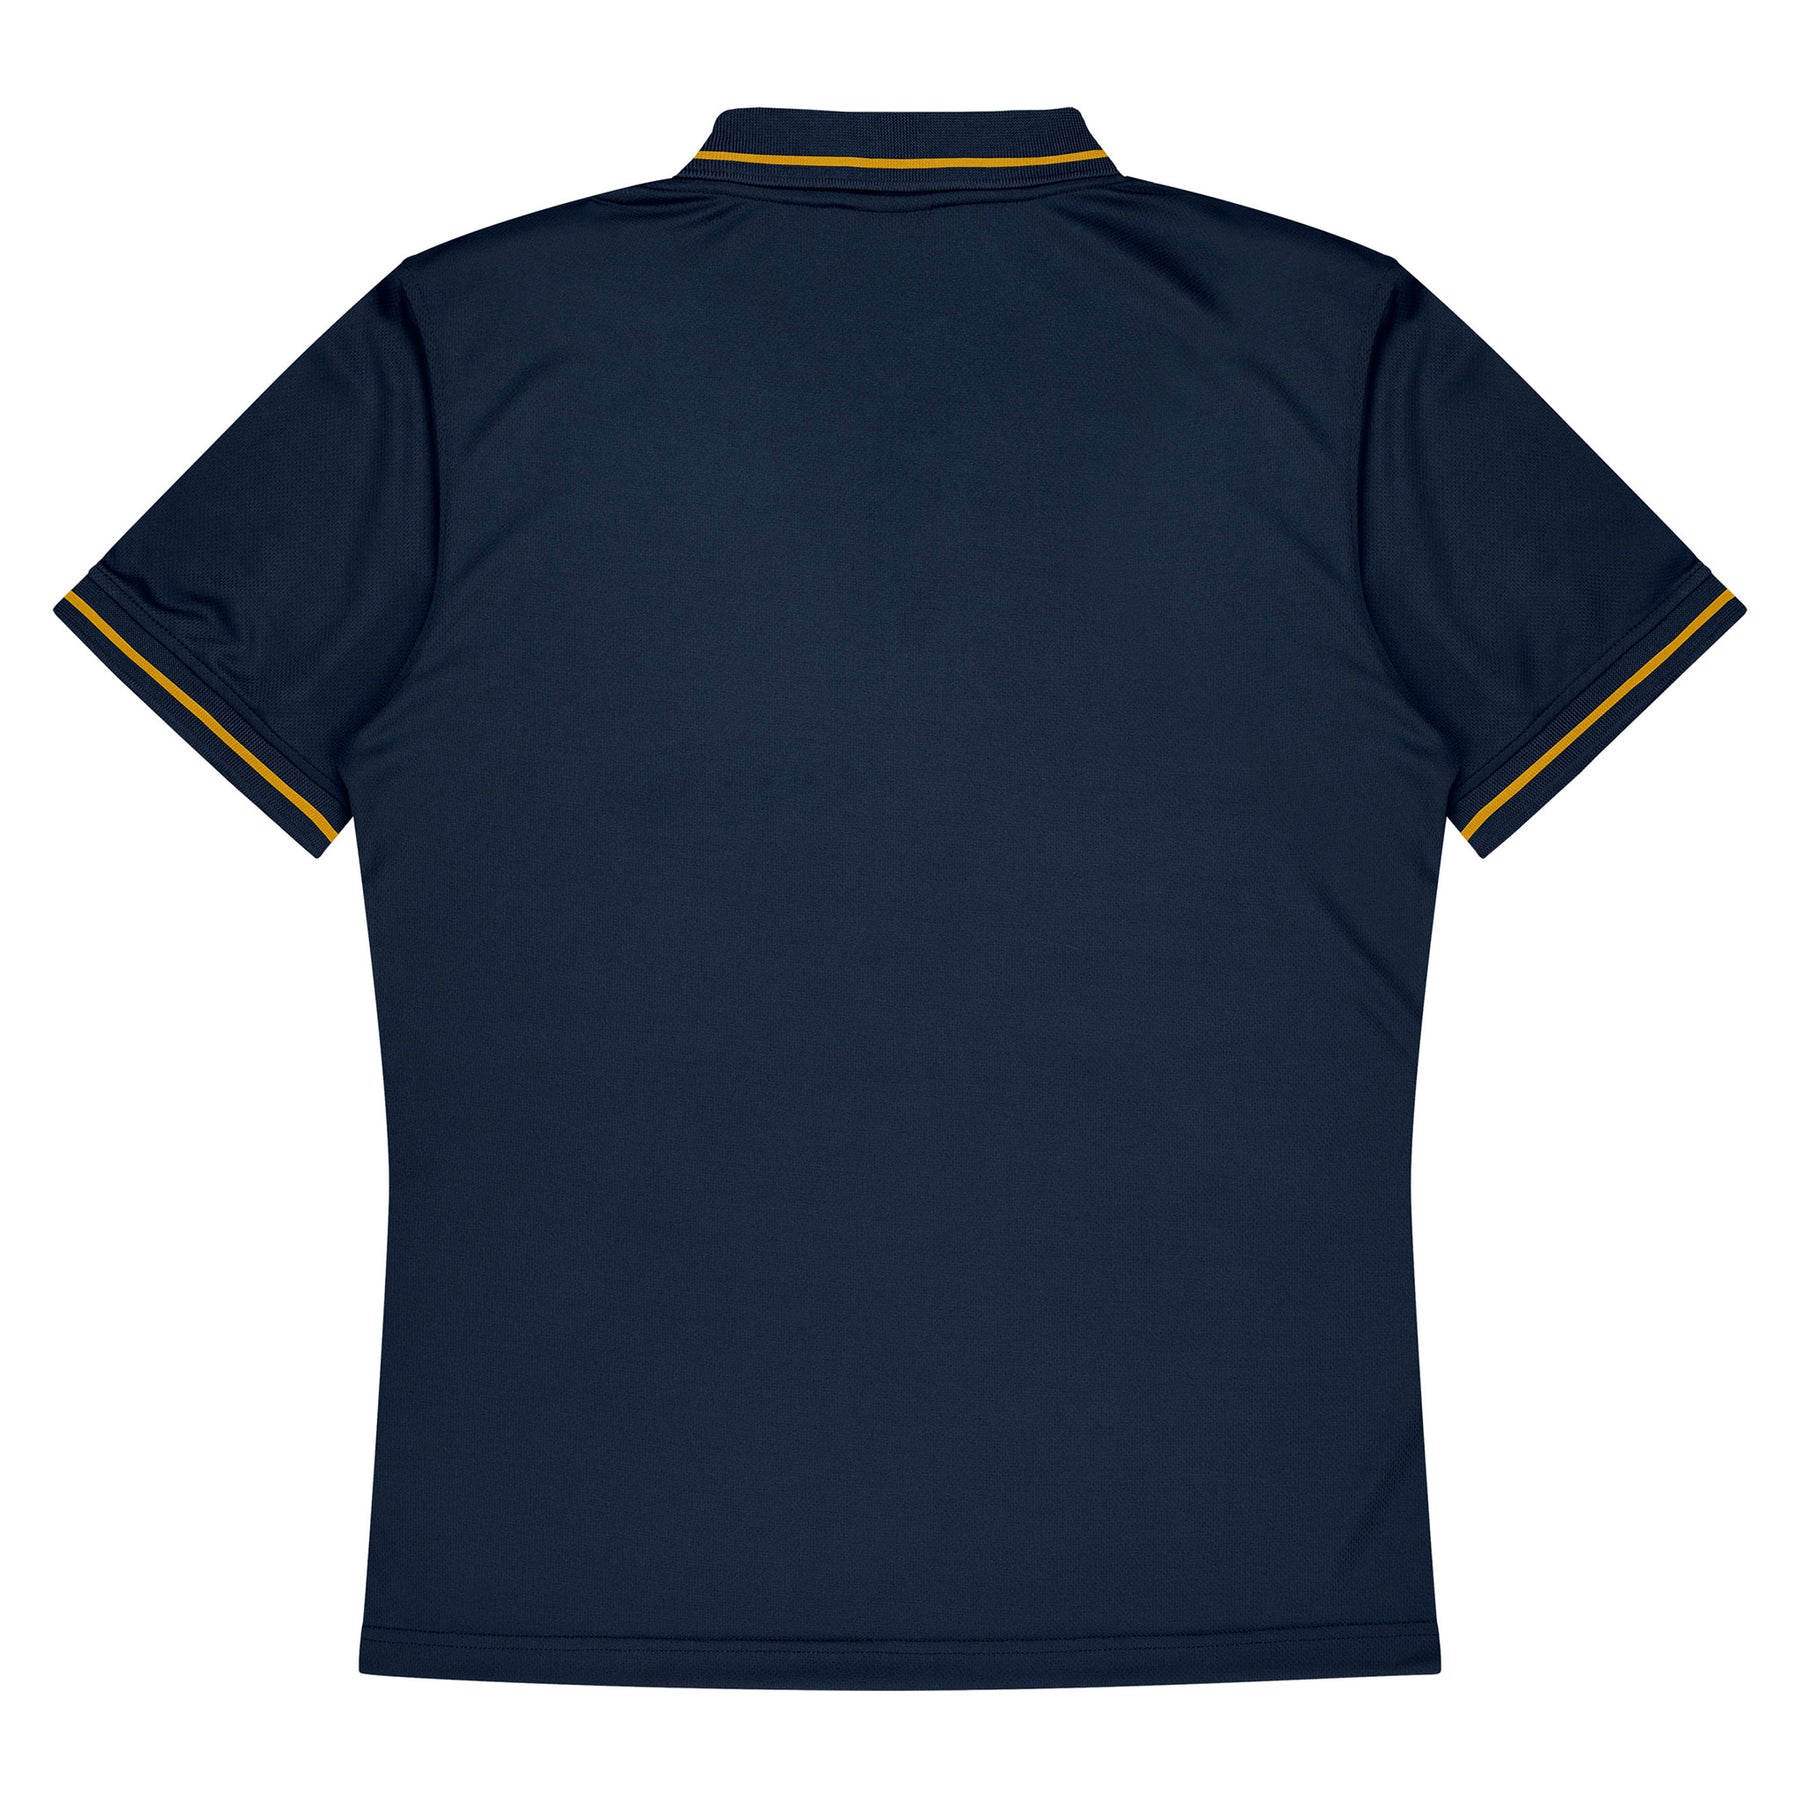 cottesloe kids polo in navy gold